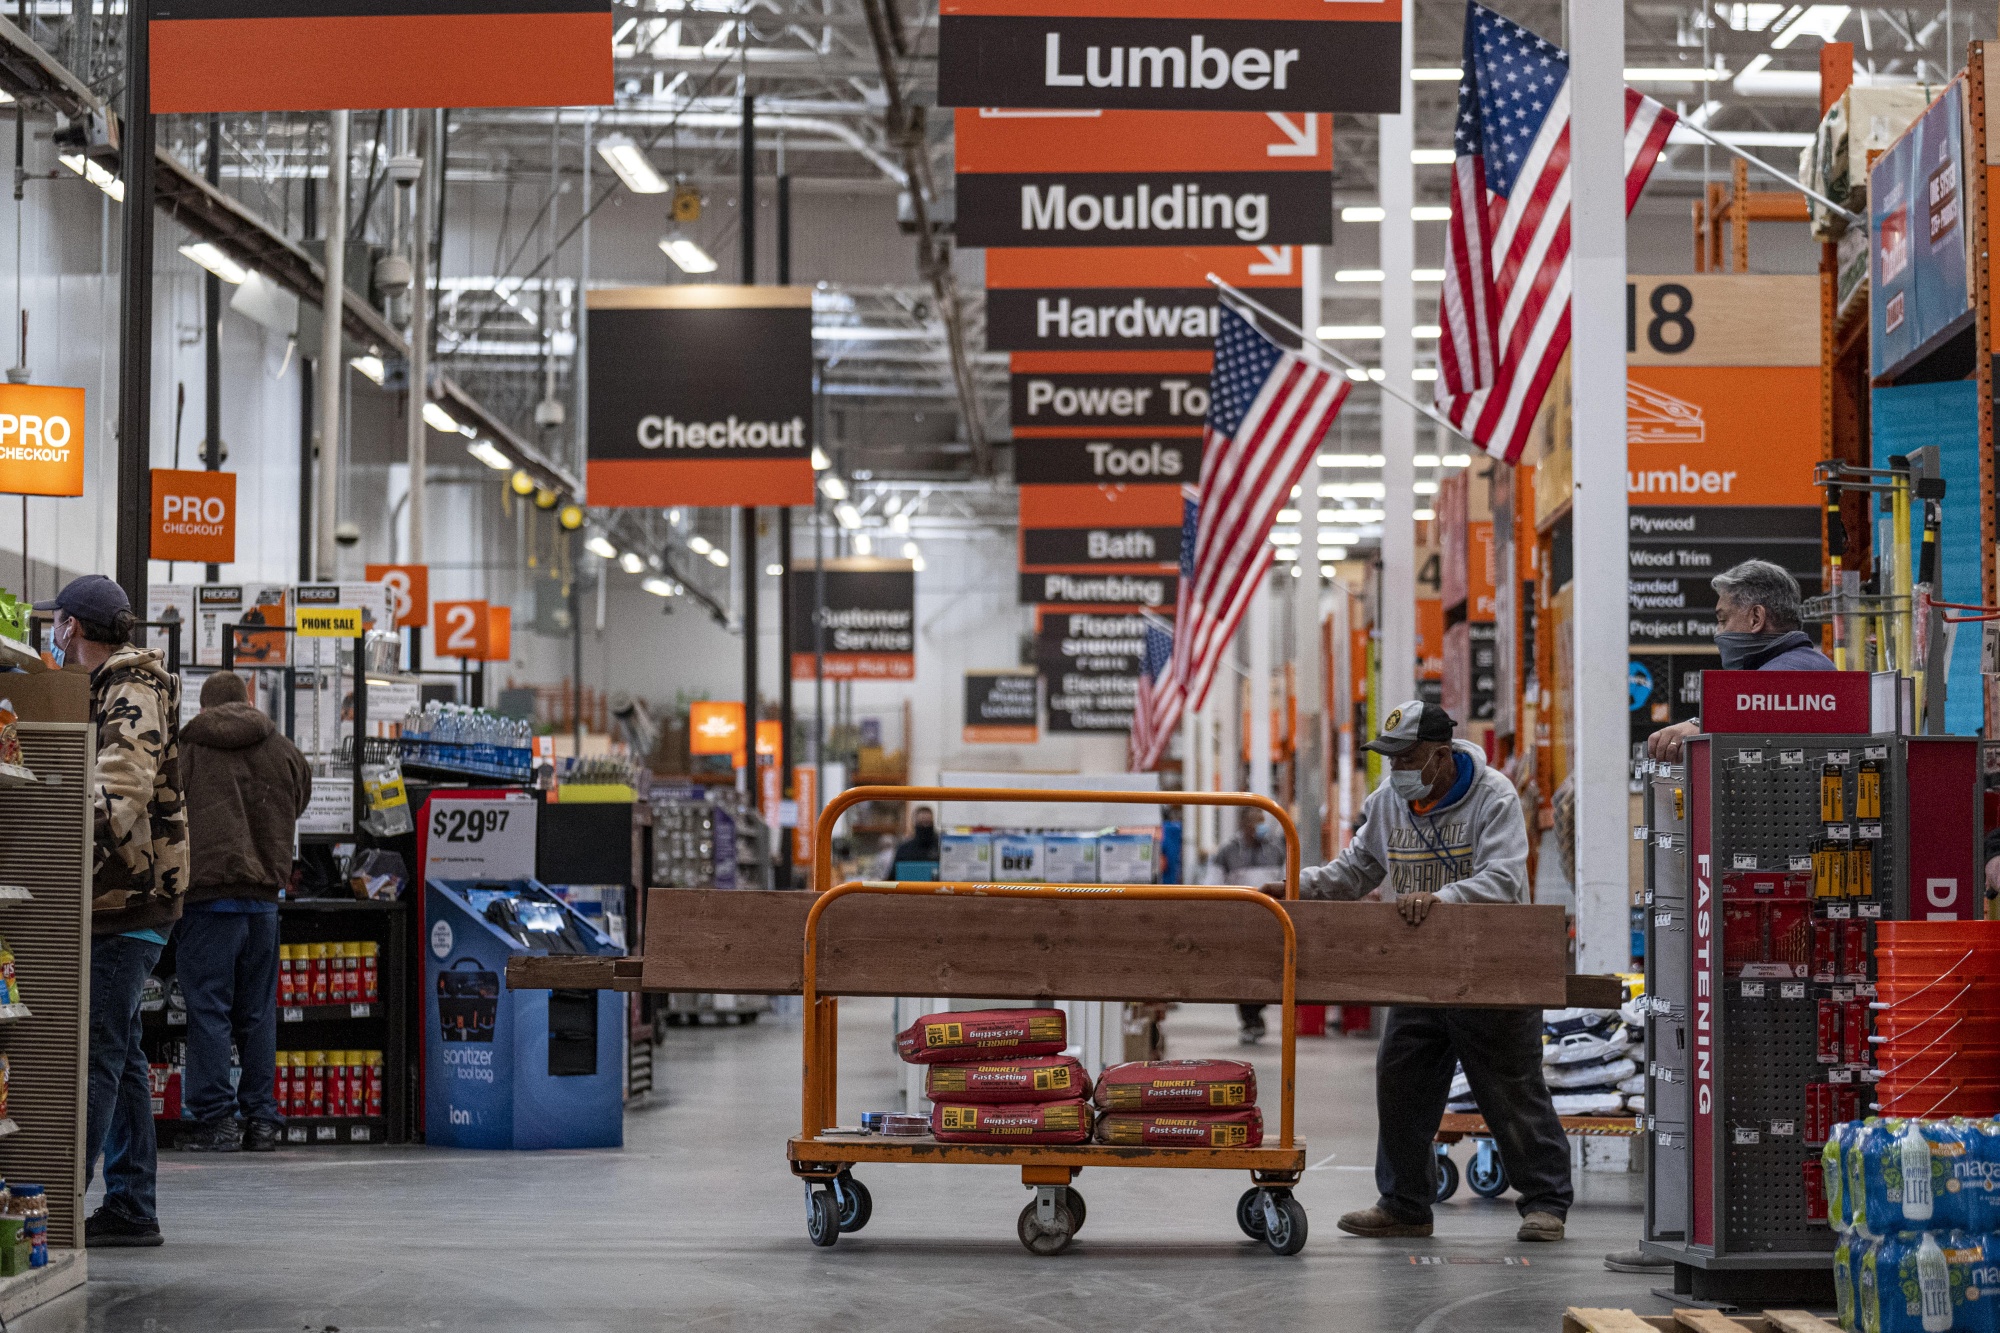 Lowe’s, Home Depot Turn to Livestreaming to Build on Covid Gains